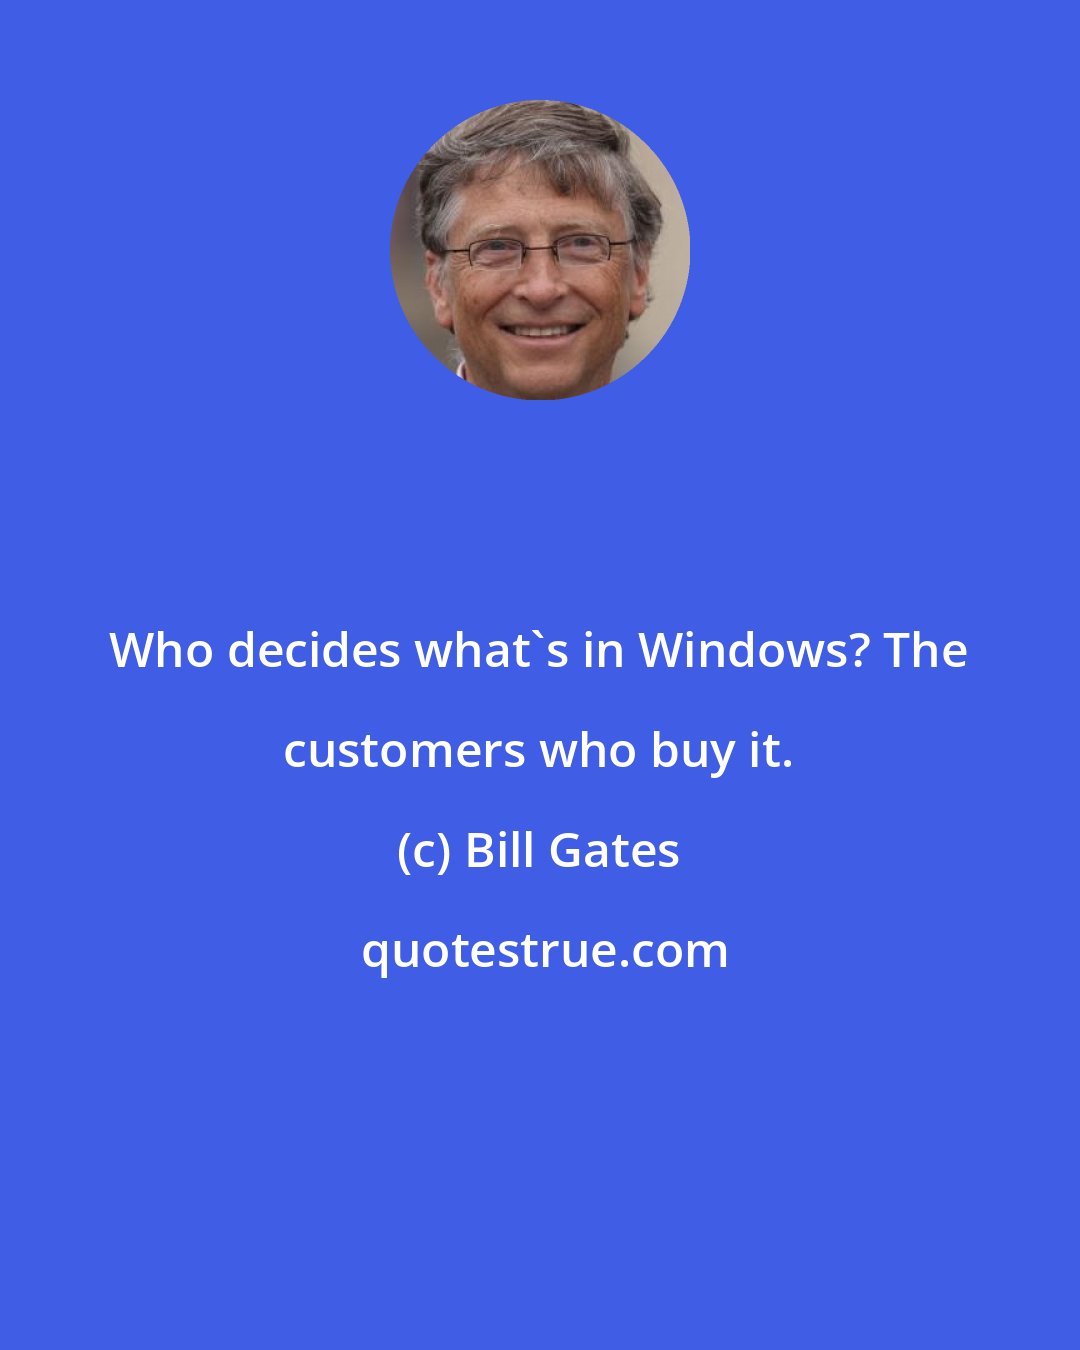 Bill Gates: Who decides what's in Windows? The customers who buy it.